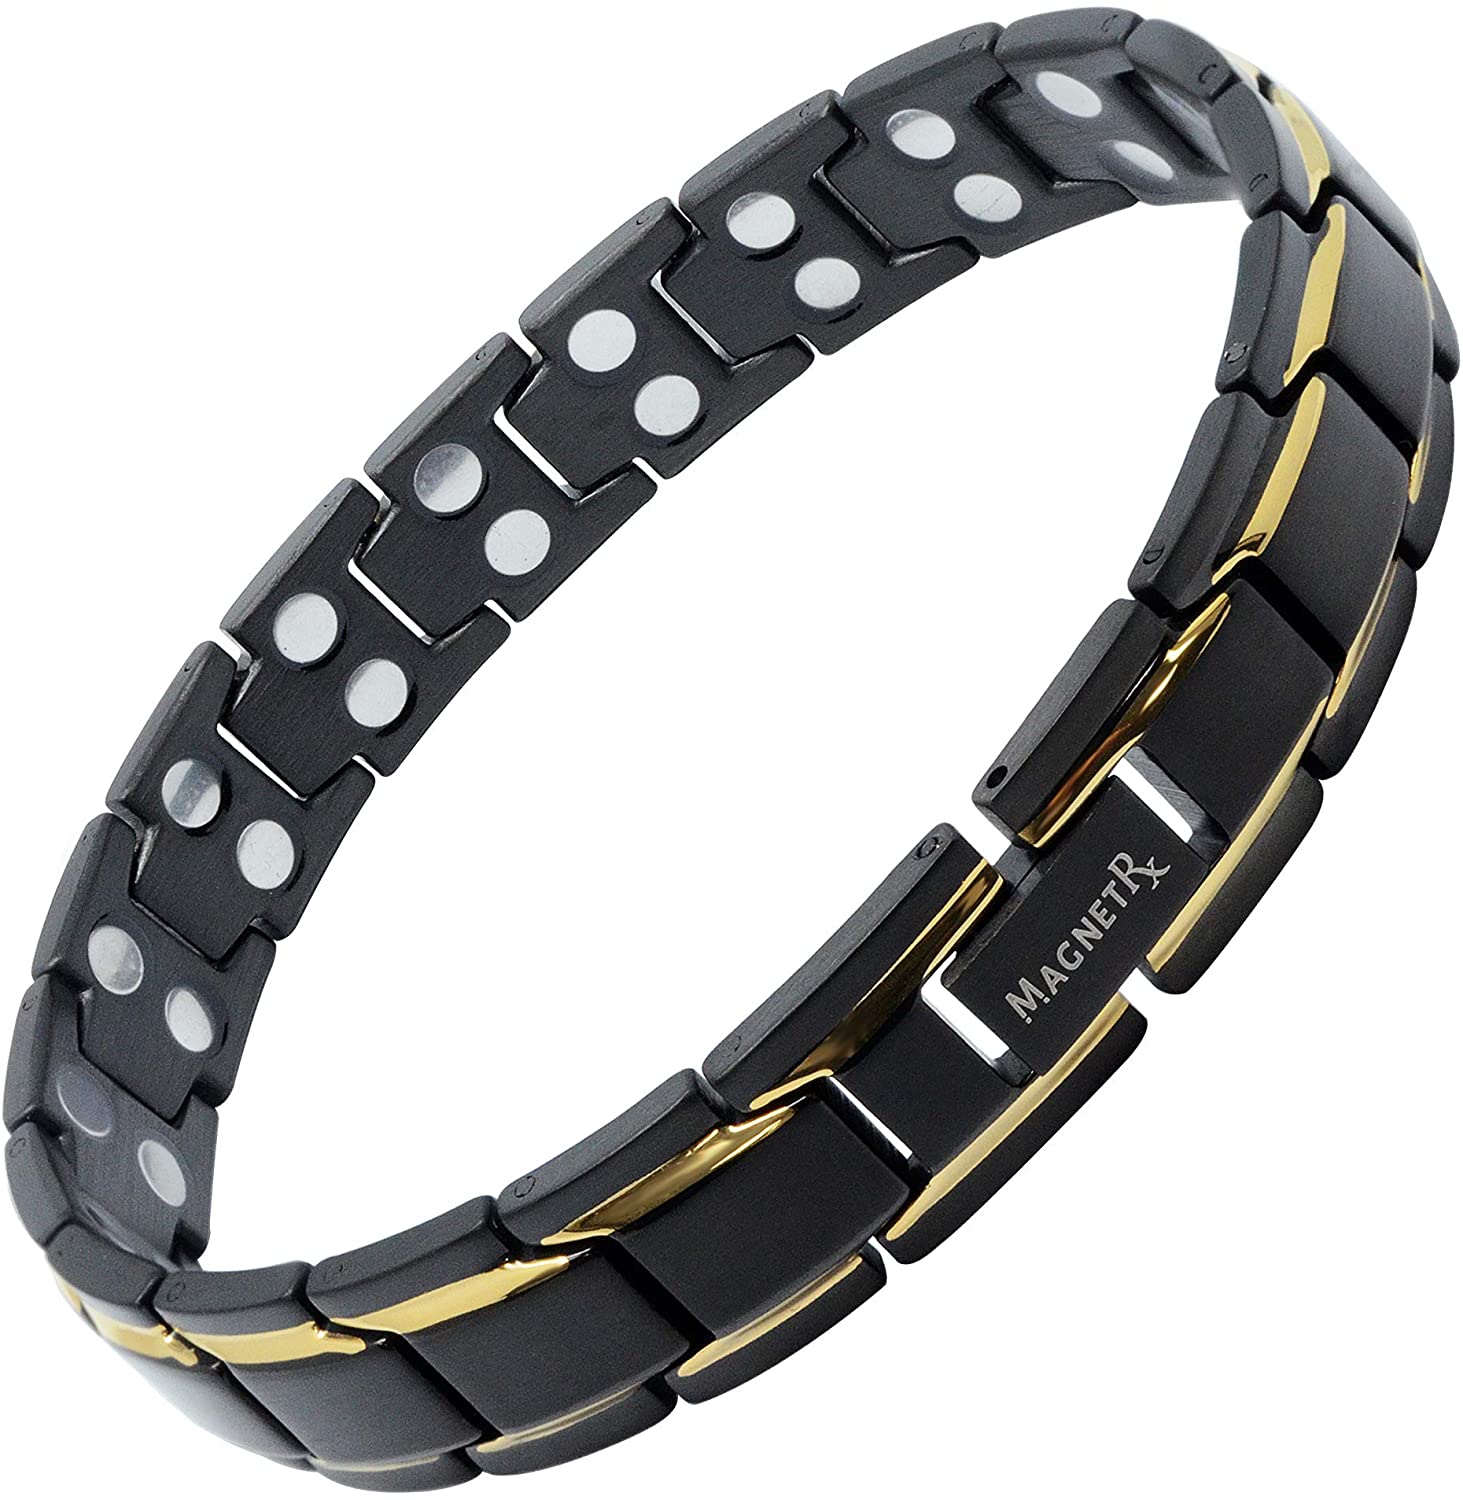 Review of MagnetRX Ultra Strength Magnetic Therapy Bracelet - Arthritis Pain Relief